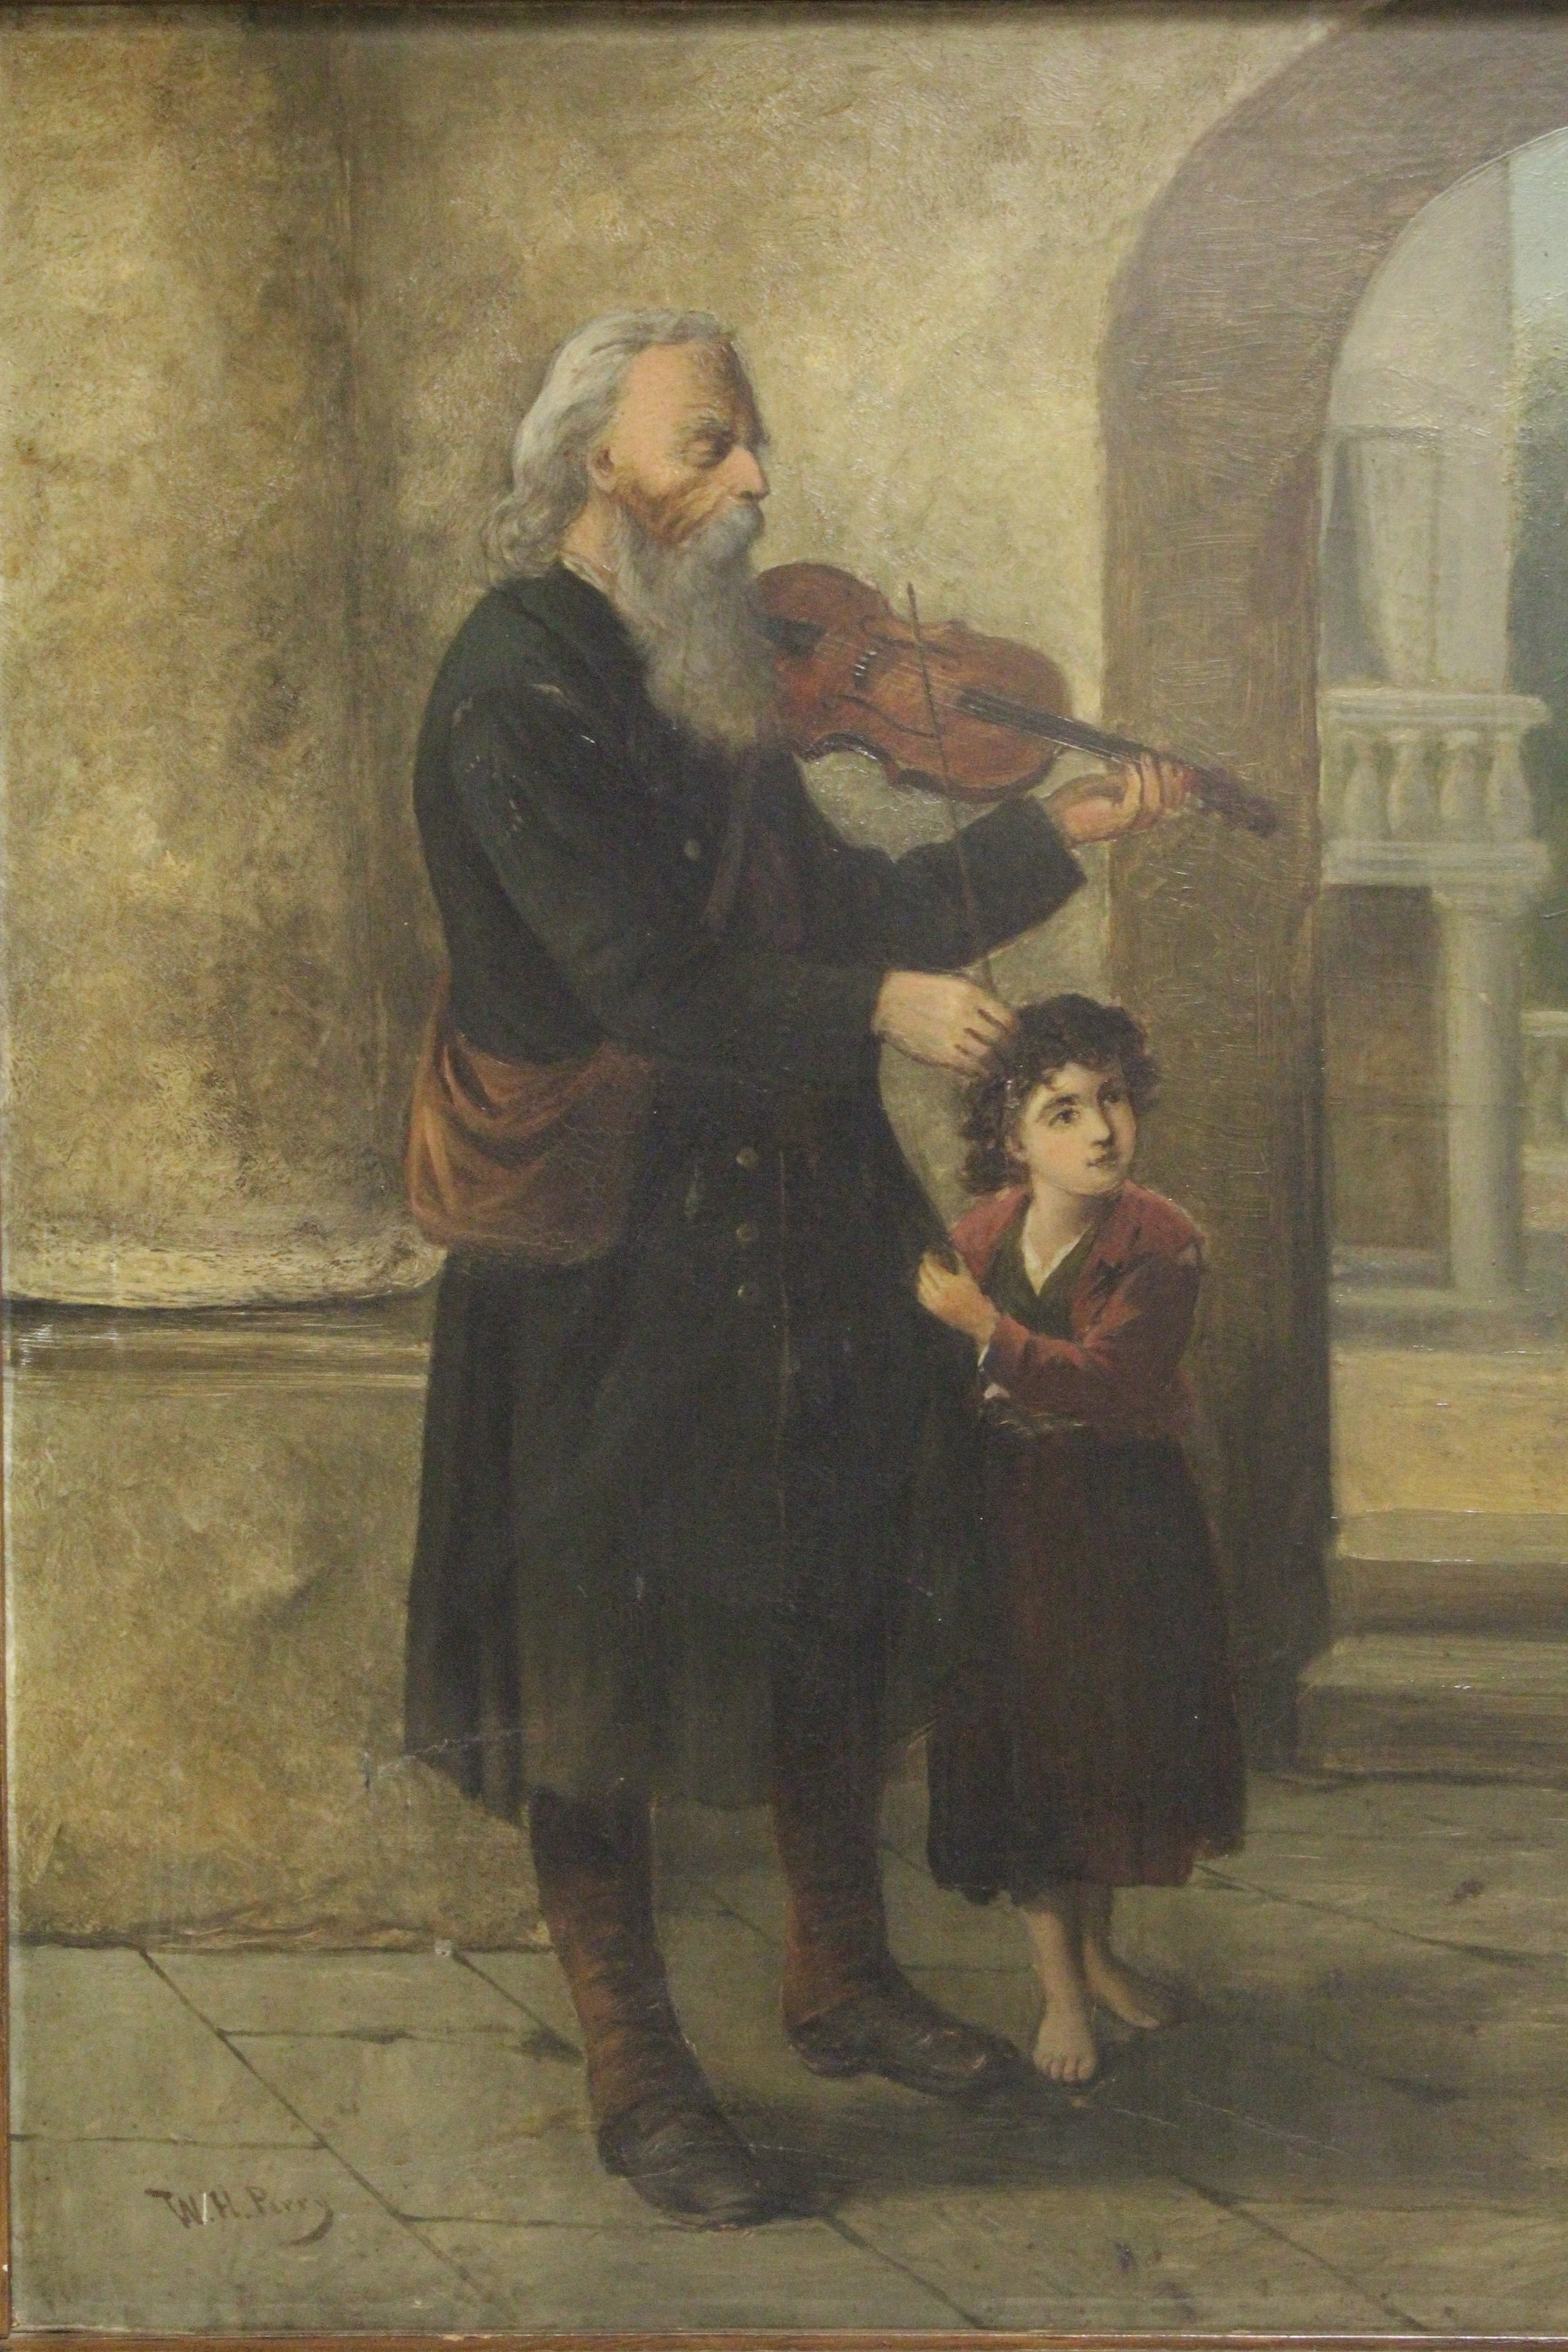 PERRY, W. H. (19th century). "The Blind Fiddler". Signed; oil on canvas: 36" x 28".